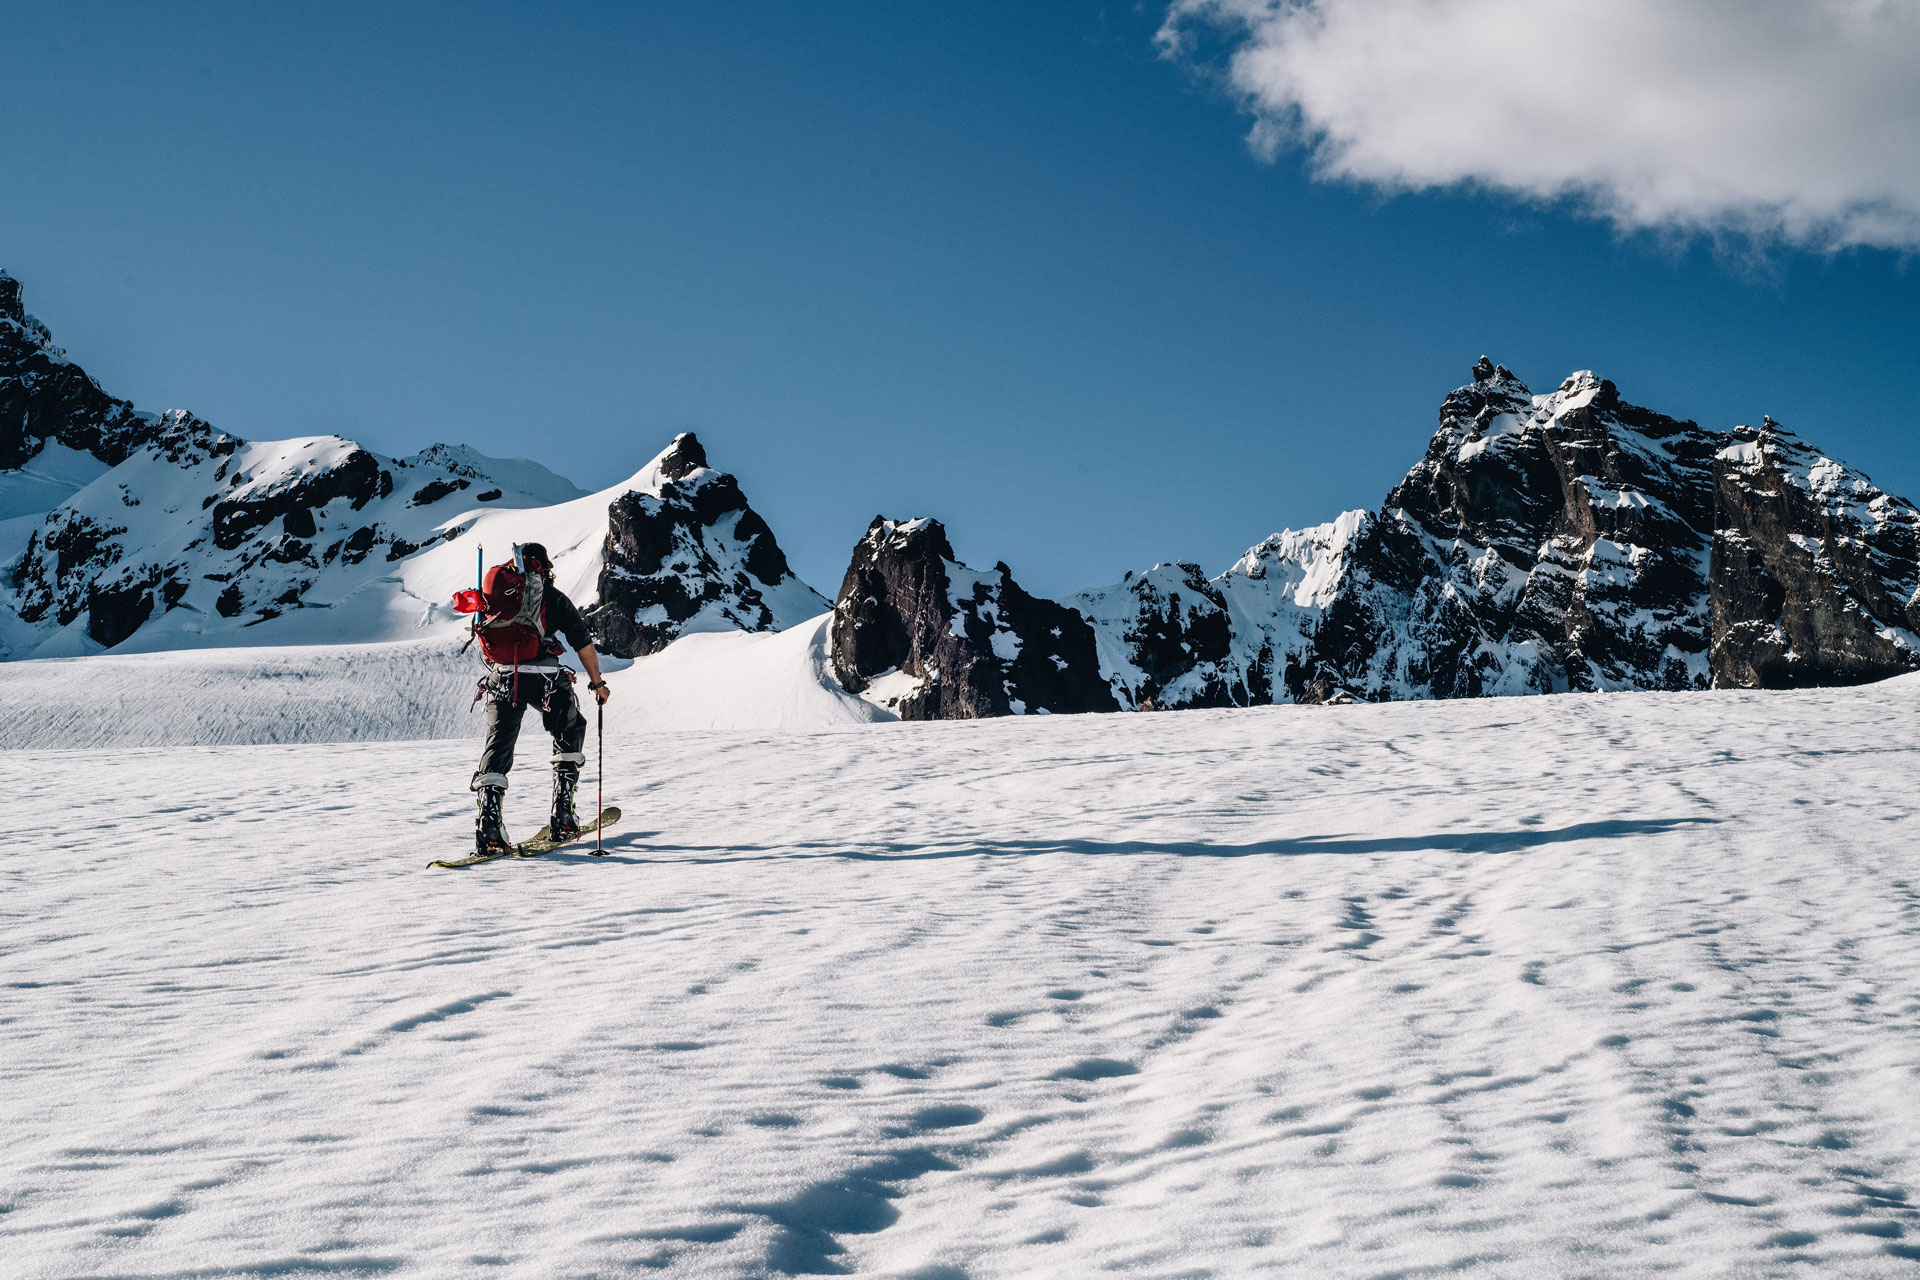 Ski Mountaineering: Gear List & Tips to Get Started